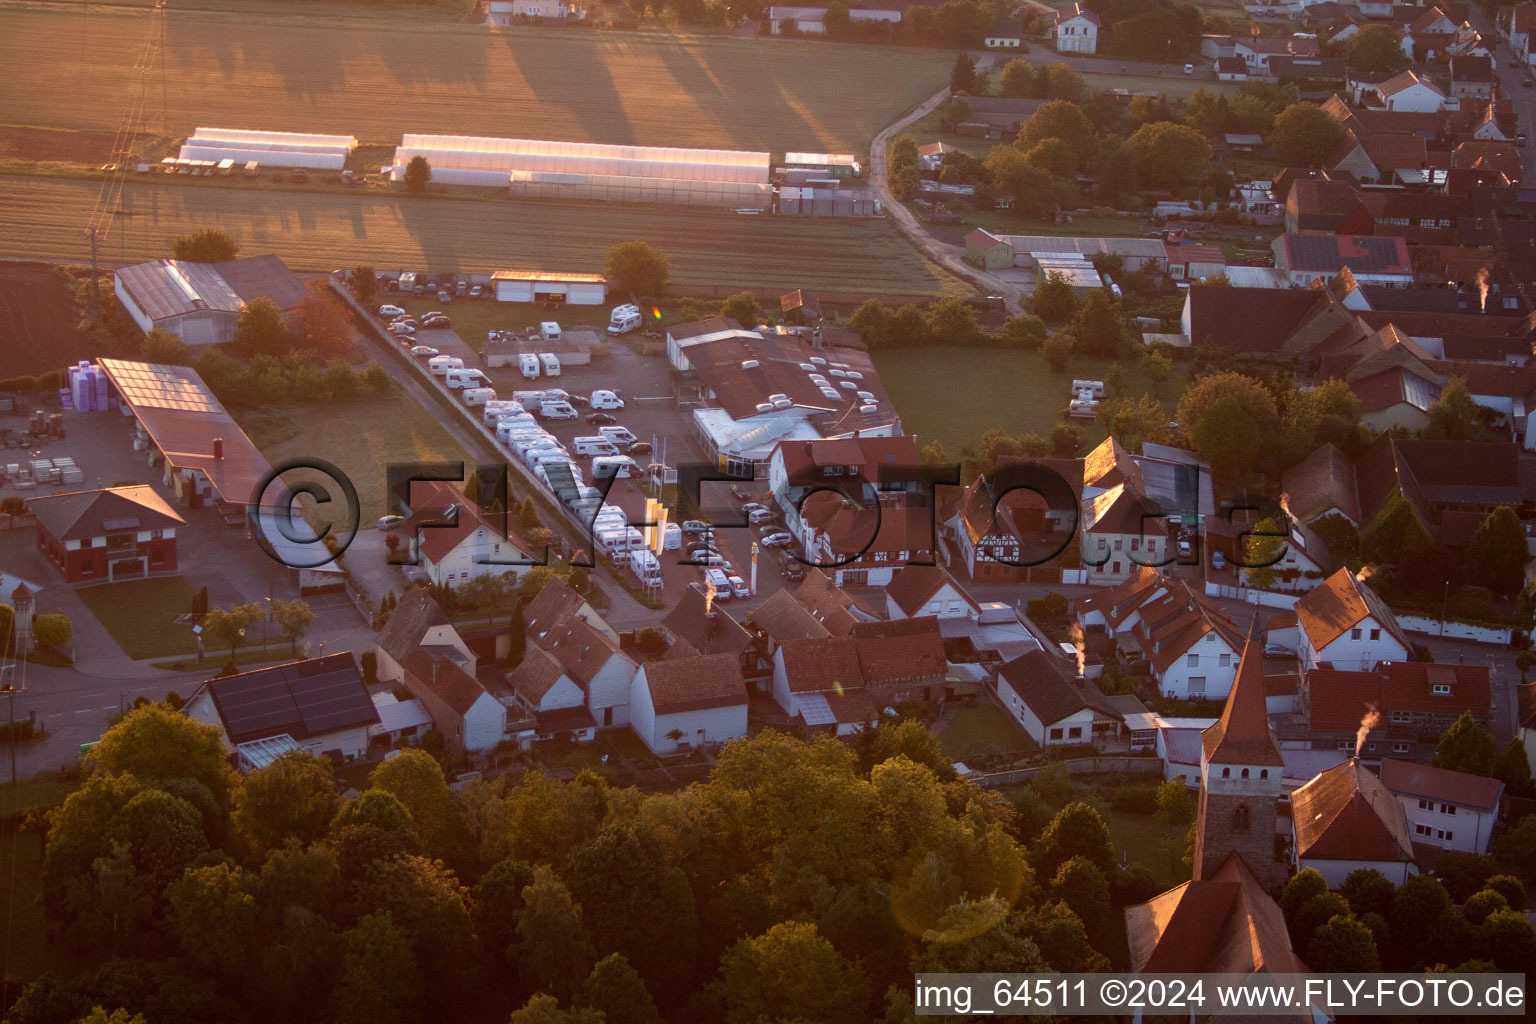 Oblique view of Frey car dealership in Minfeld in the state Rhineland-Palatinate, Germany